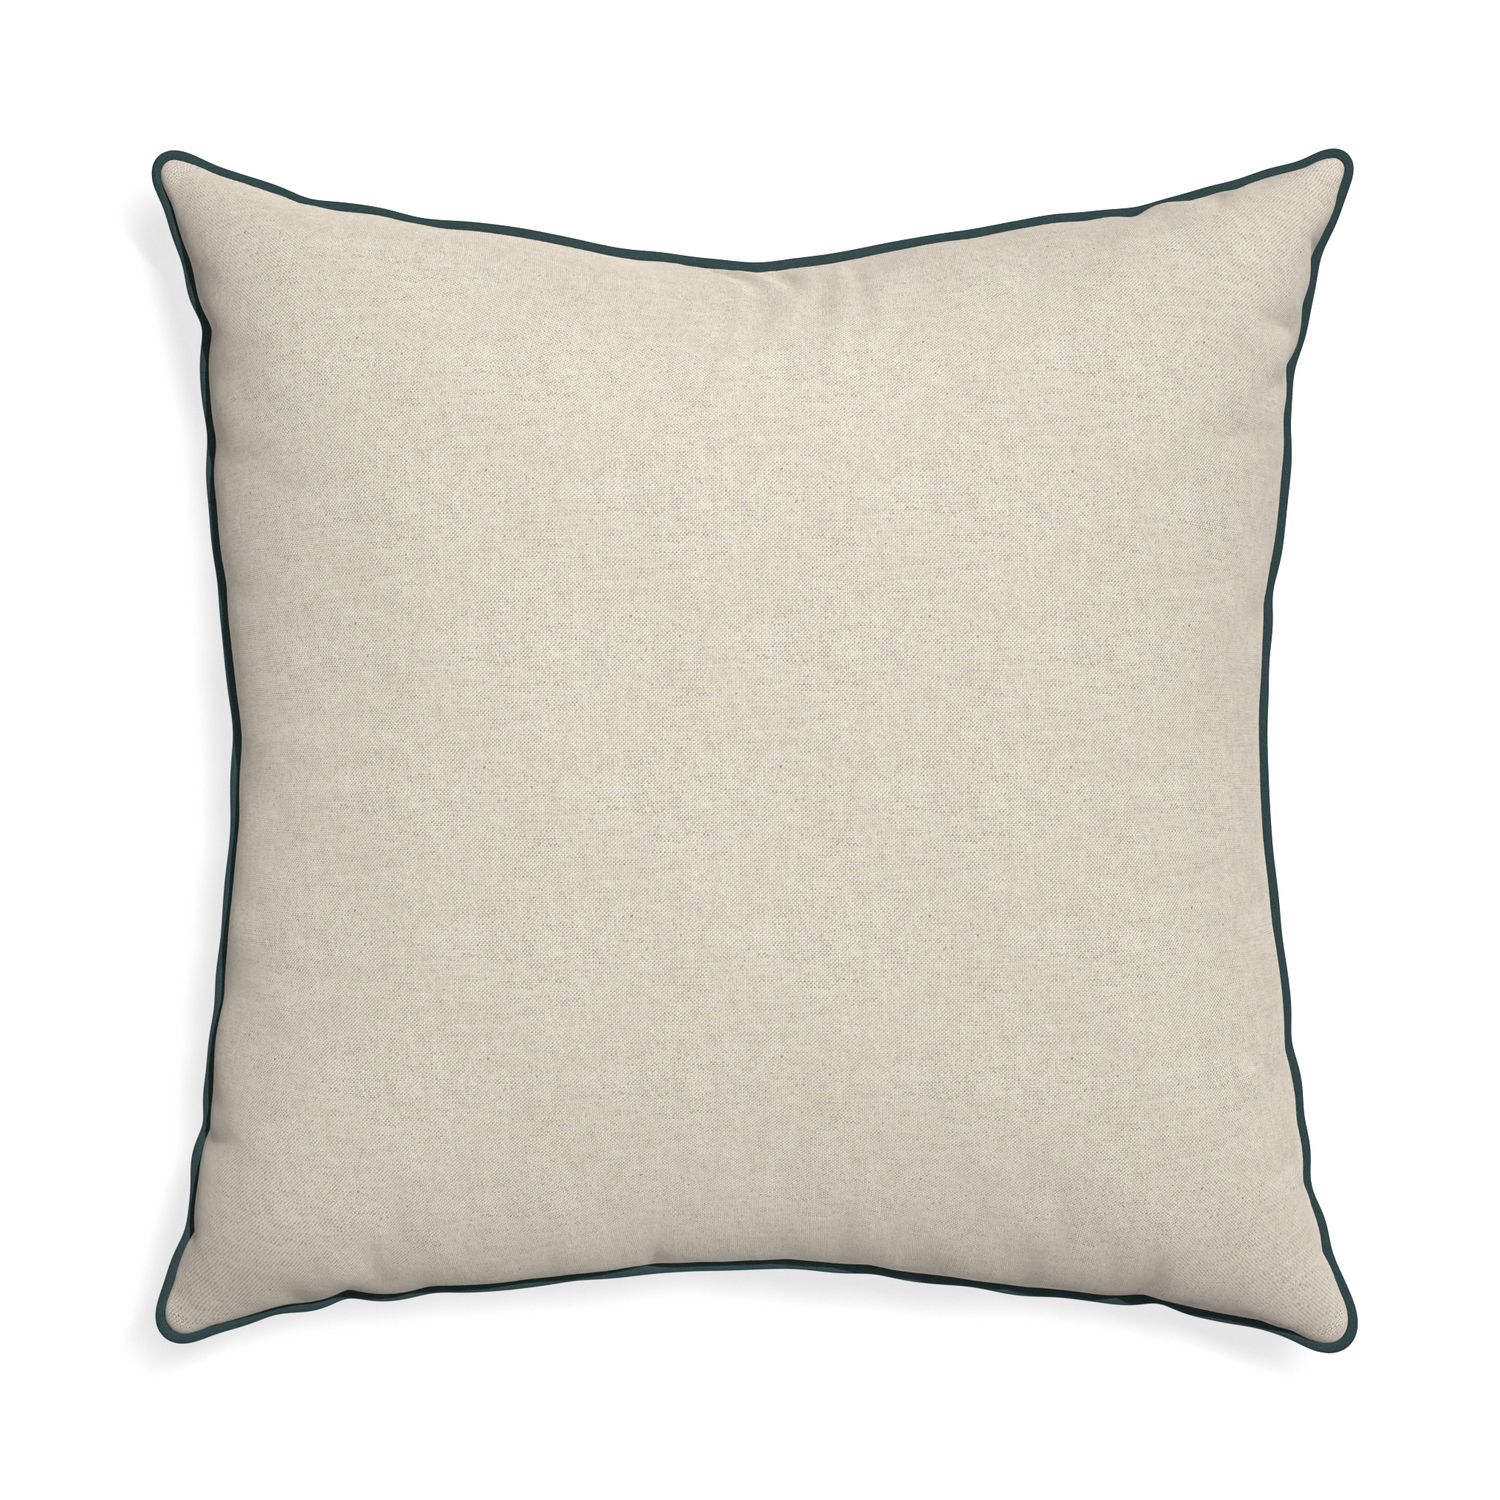 Euro-sham oat custom light brownpillow with p piping on white background